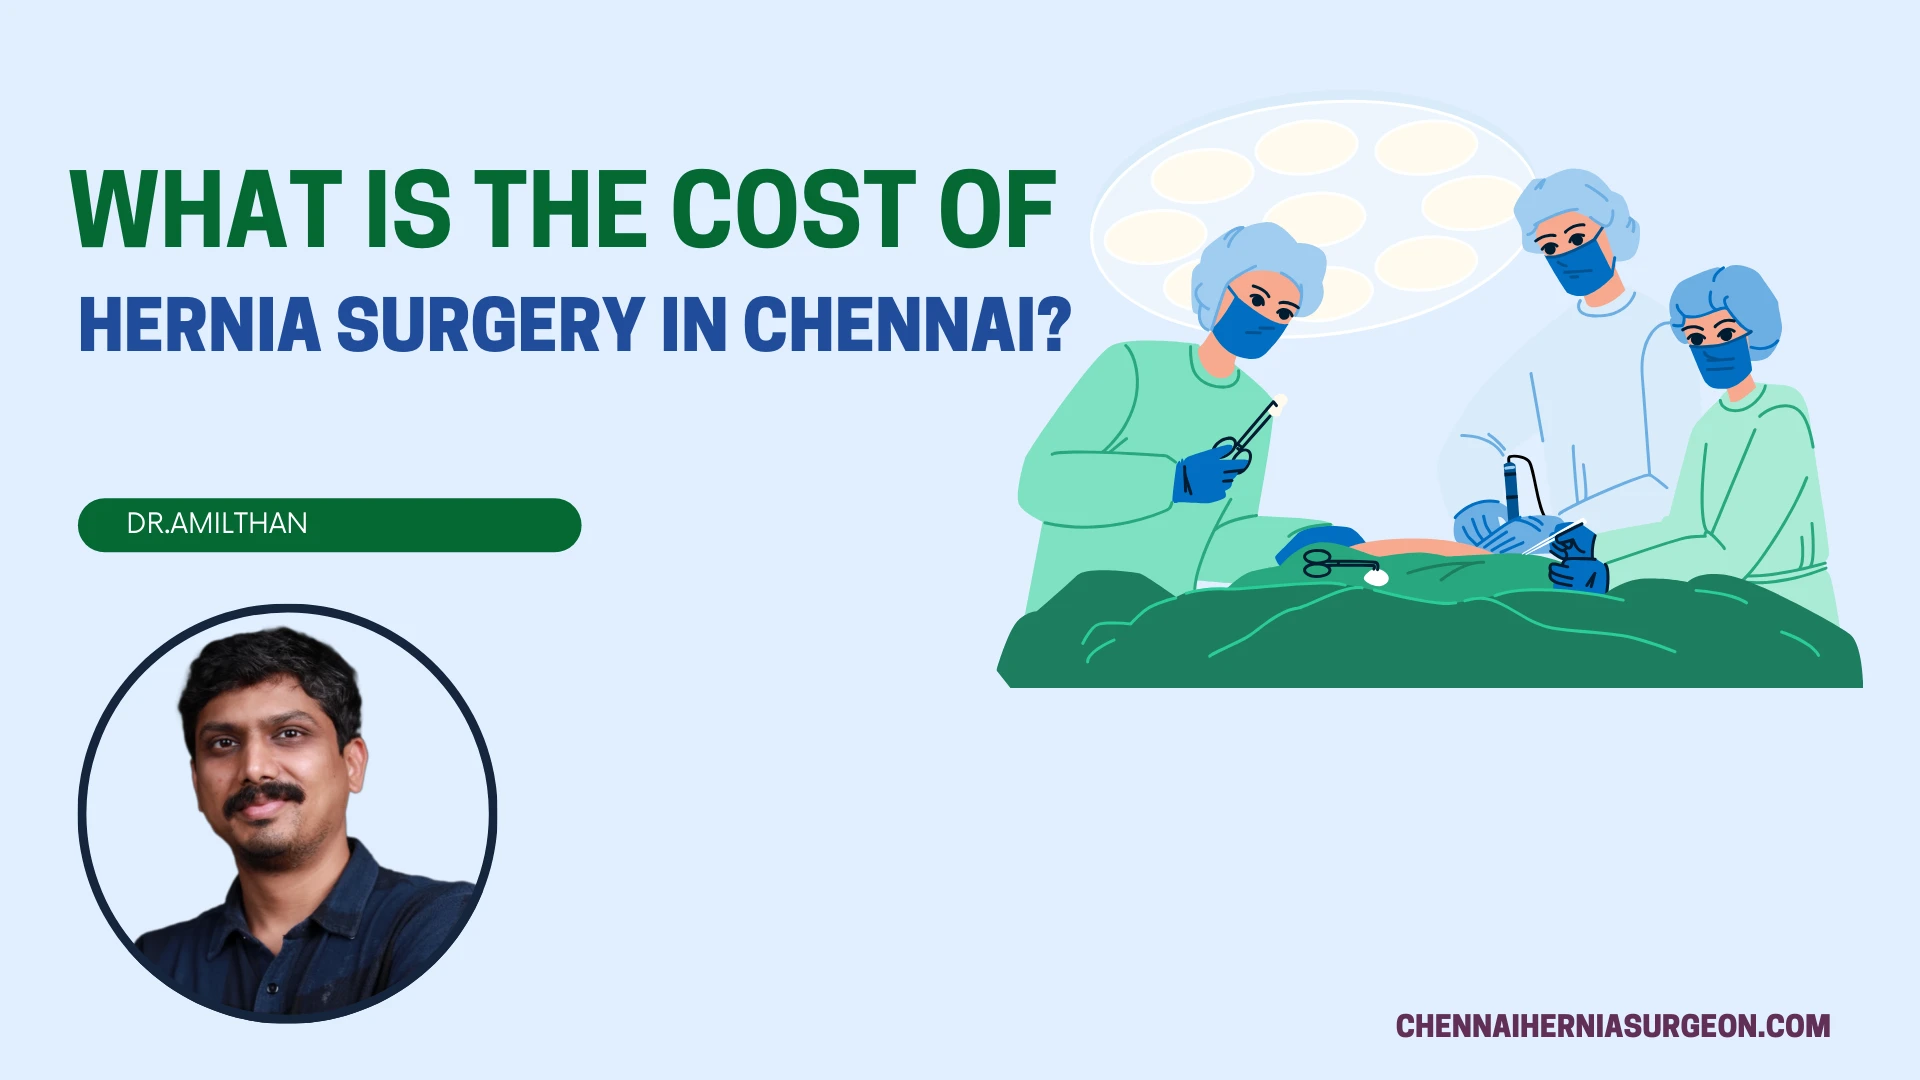 What is the cost of Hernia Surgery in chennai